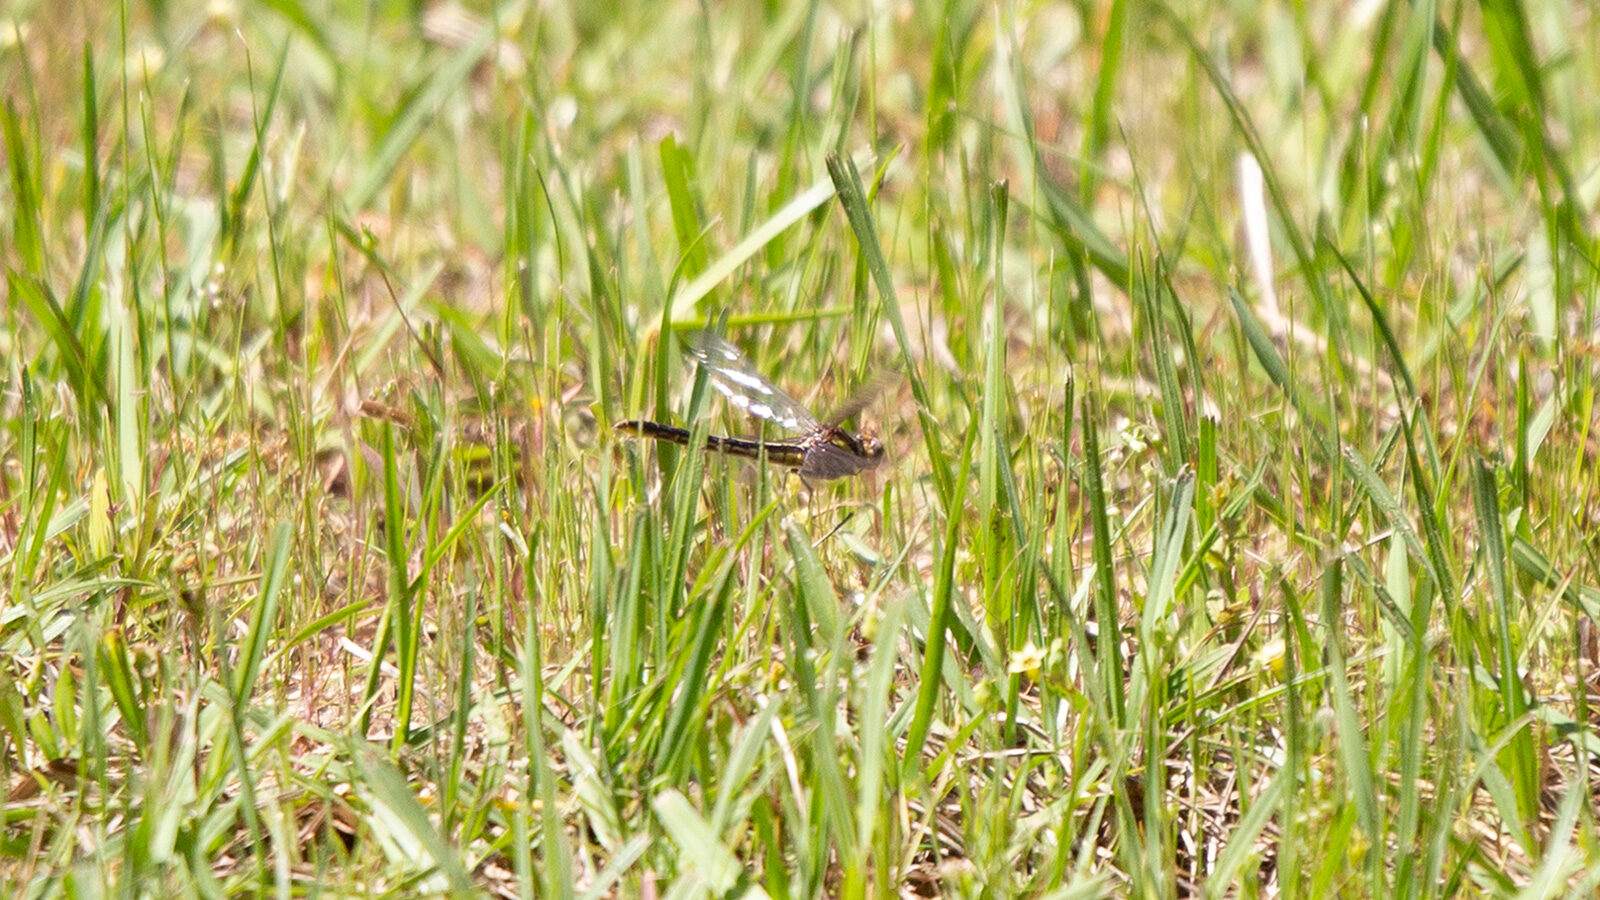 Female blue dasher dragonfly flying close to the ground